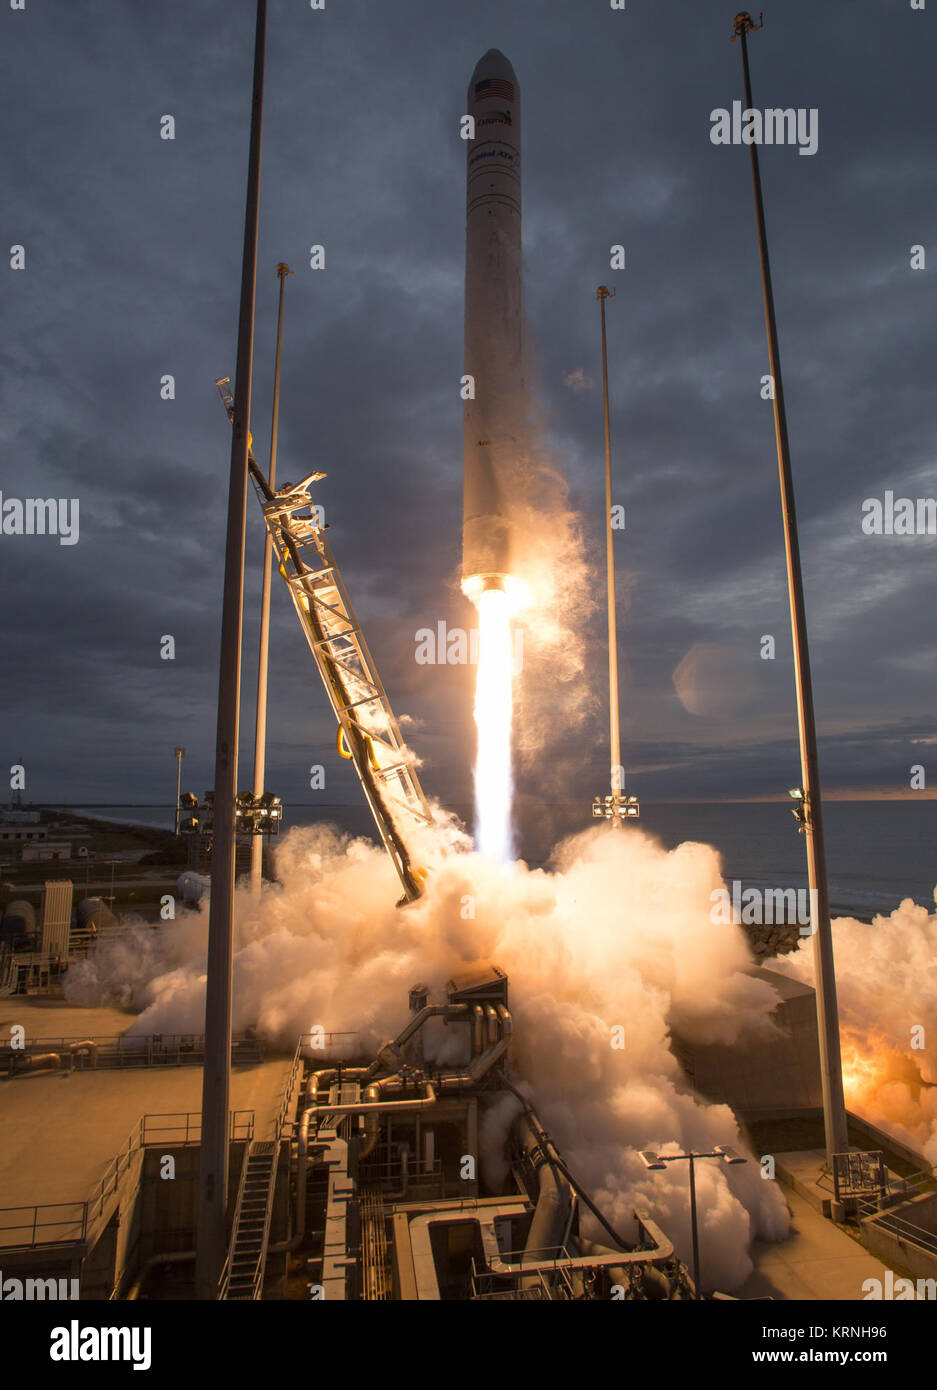 The Orbital ATK Antares rocket, with the Cygnus spacecraft onboard, launches from Pad-0A, Sunday, Nov. 12, 2017 at NASA's Wallops Flight Facility in Virginia. Orbital ATK’s eighth contracted cargo resupply mission with NASA to the International Space Station will deliver approximately 7,400 pounds of science and research, crew supplies and vehicle hardware to the orbital laboratory and its crew. Photo Credit: (NASA/Bill Ingalls) Orbital ATK CRS-8 Launch (NHQ201711120014) Stock Photo